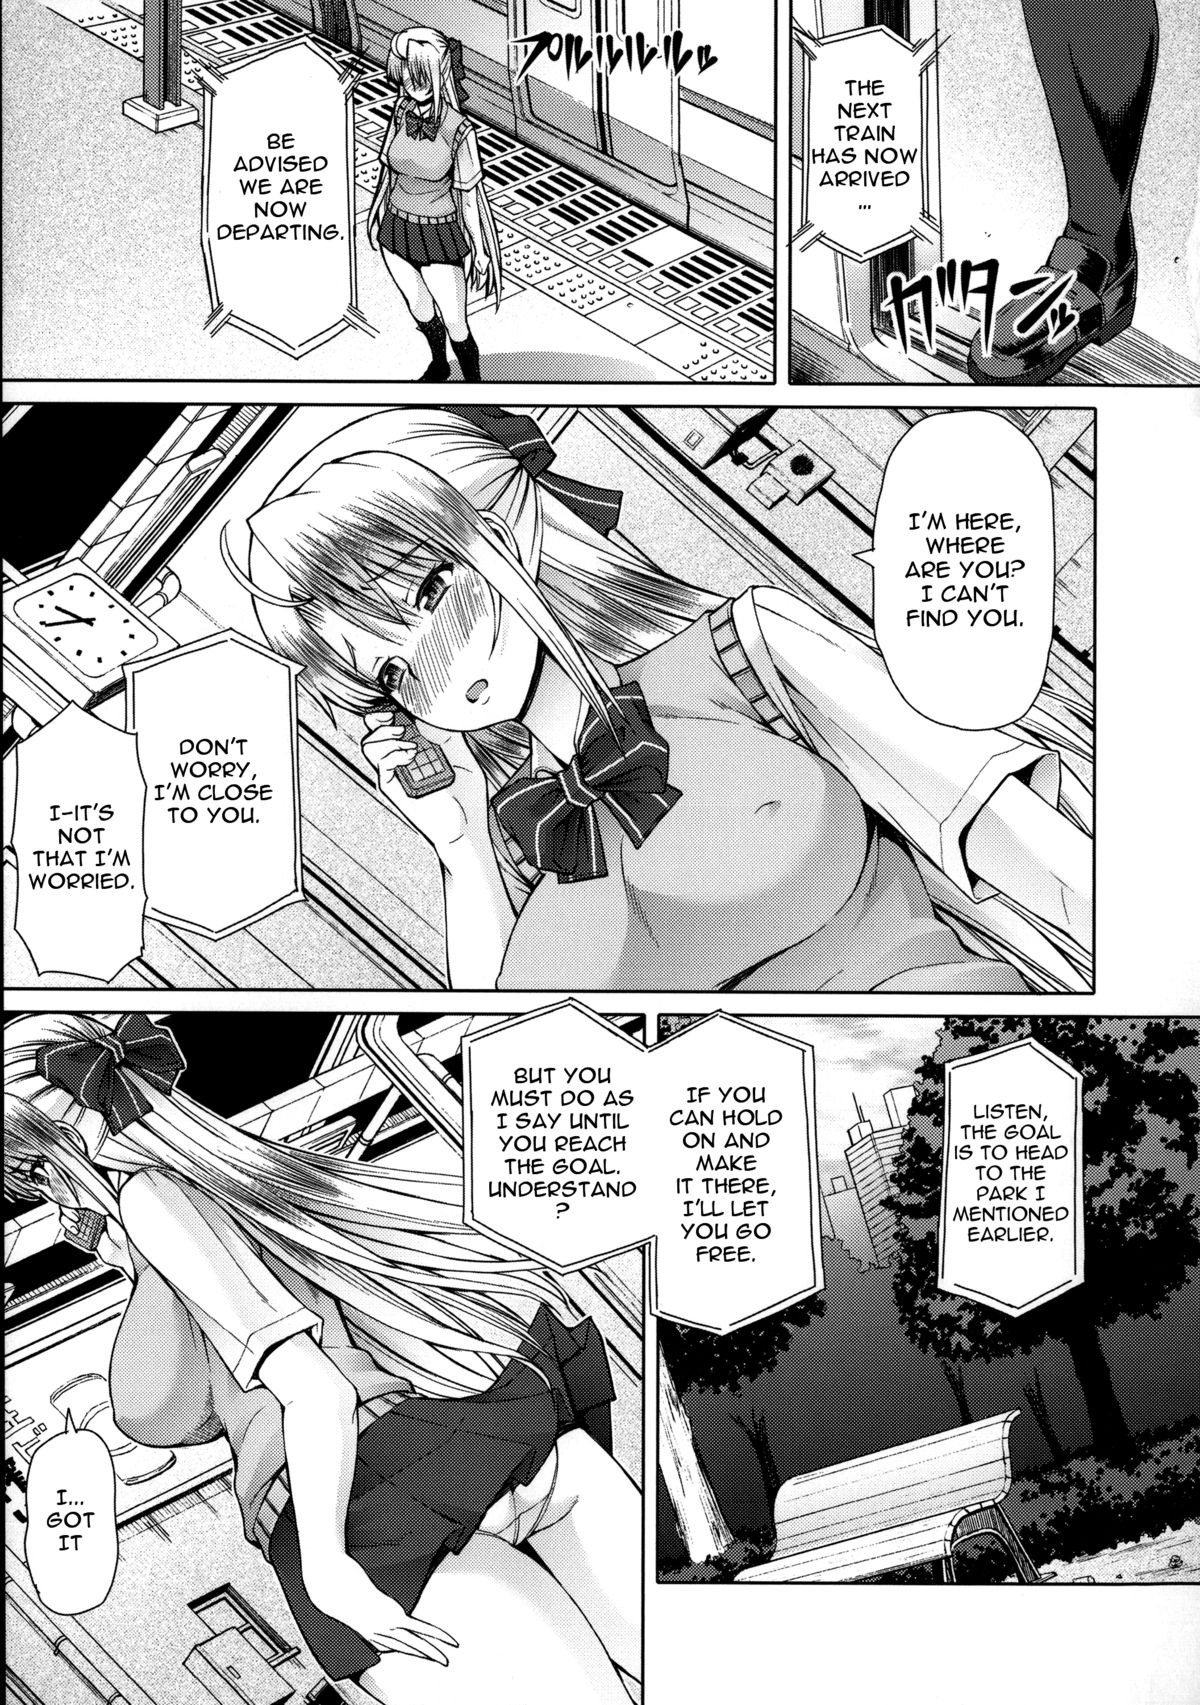 [RED-RUM] LOVE&PEACH Ch. 0-2 [English] {doujin-moe.us} page 12 full